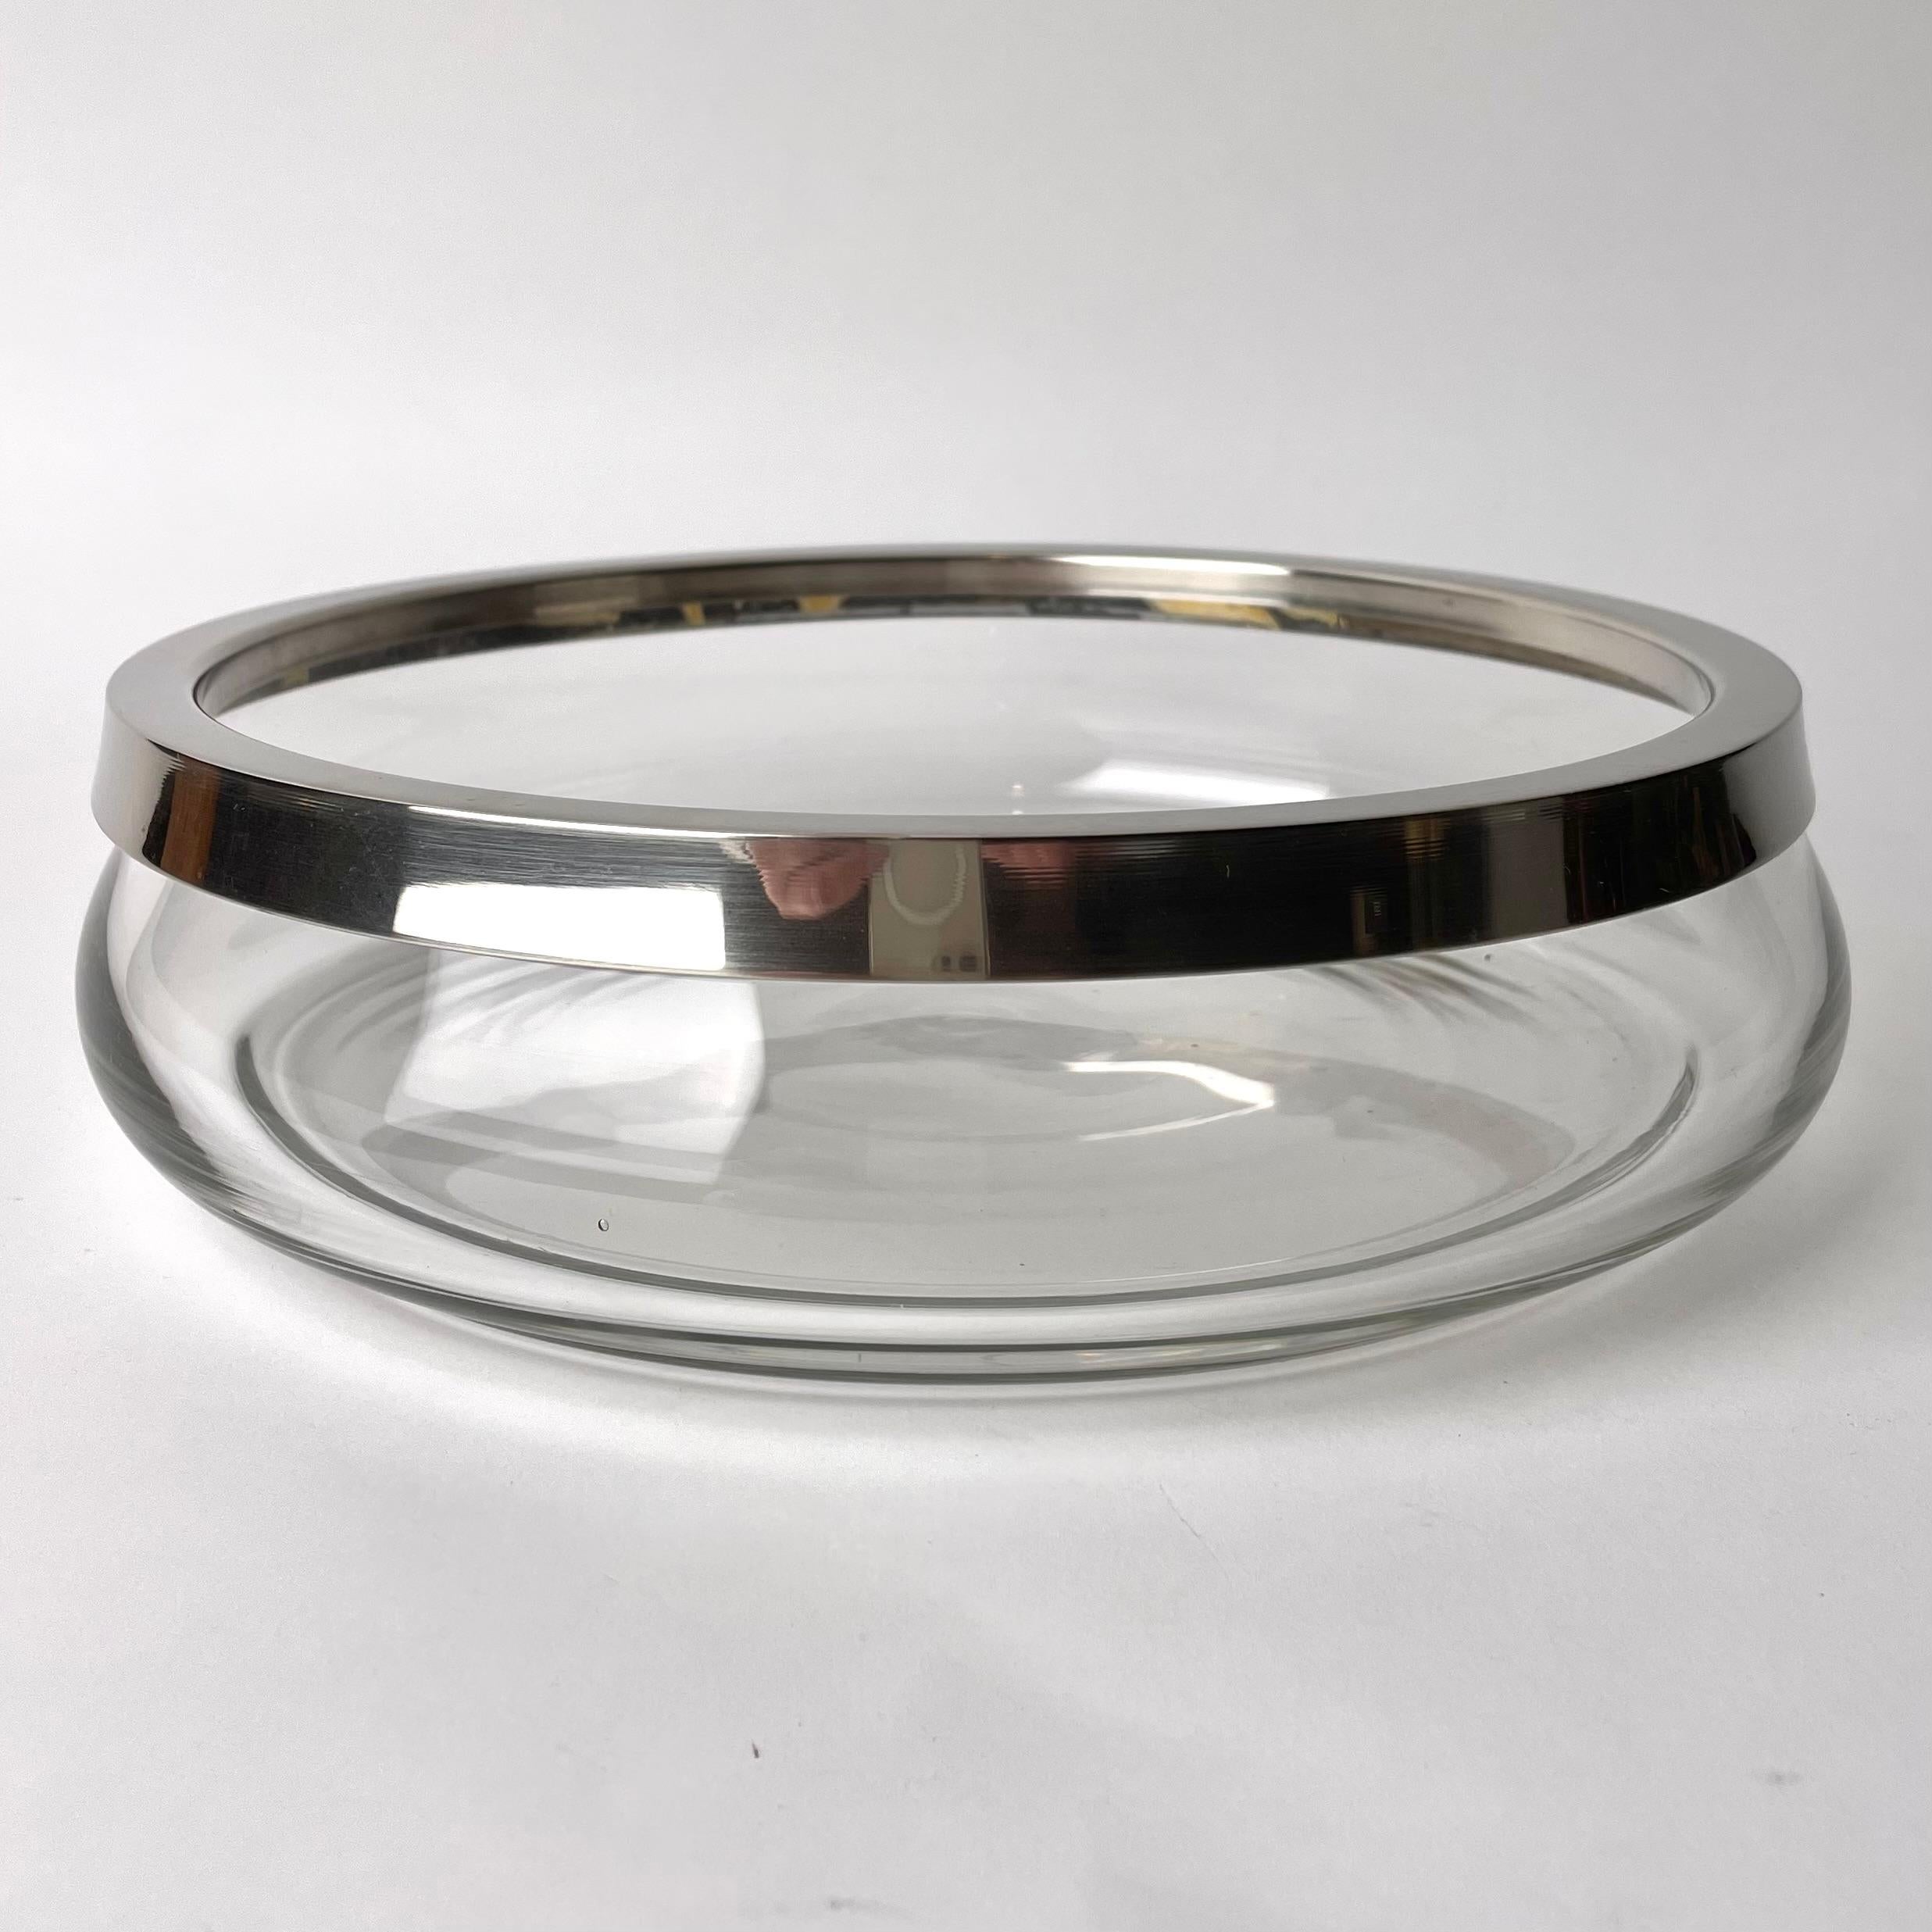 Elegant Fruit or Salad Bowl in glass and chrome. Art Deco, 1920s-1930s In period design.

Wear consistent with age and use 